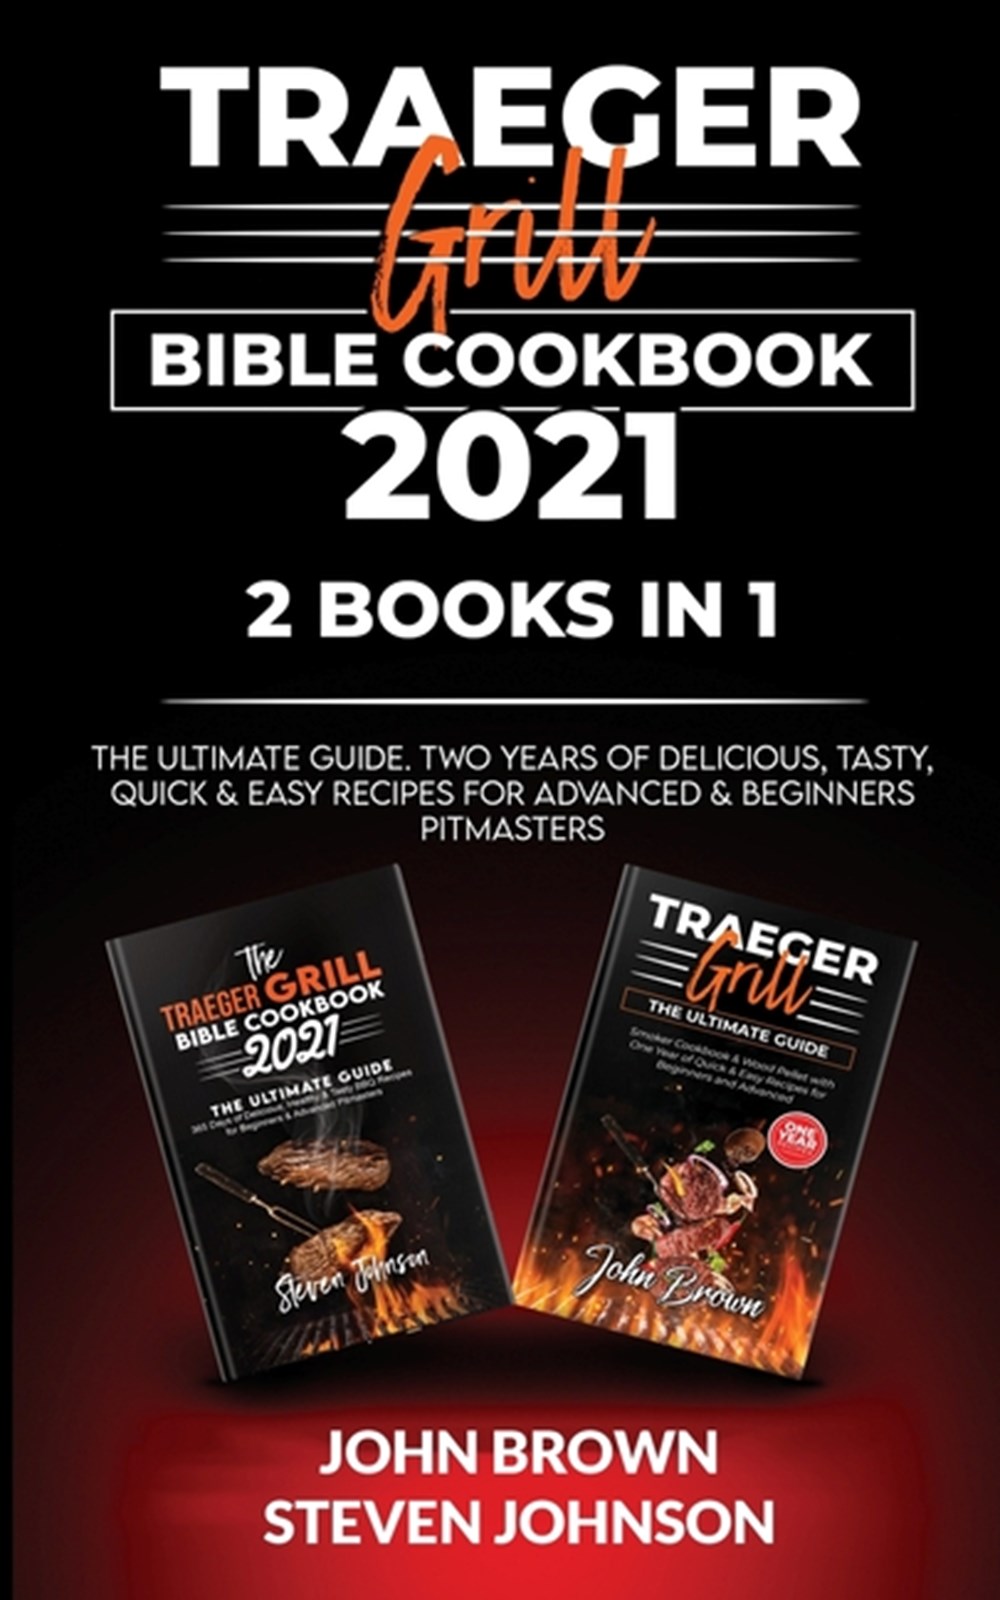 Traeger Grill Bible Cookbook 2021 The Ultimate Guide. Two Years of Delicious, Tasty, Quick & Easy Re